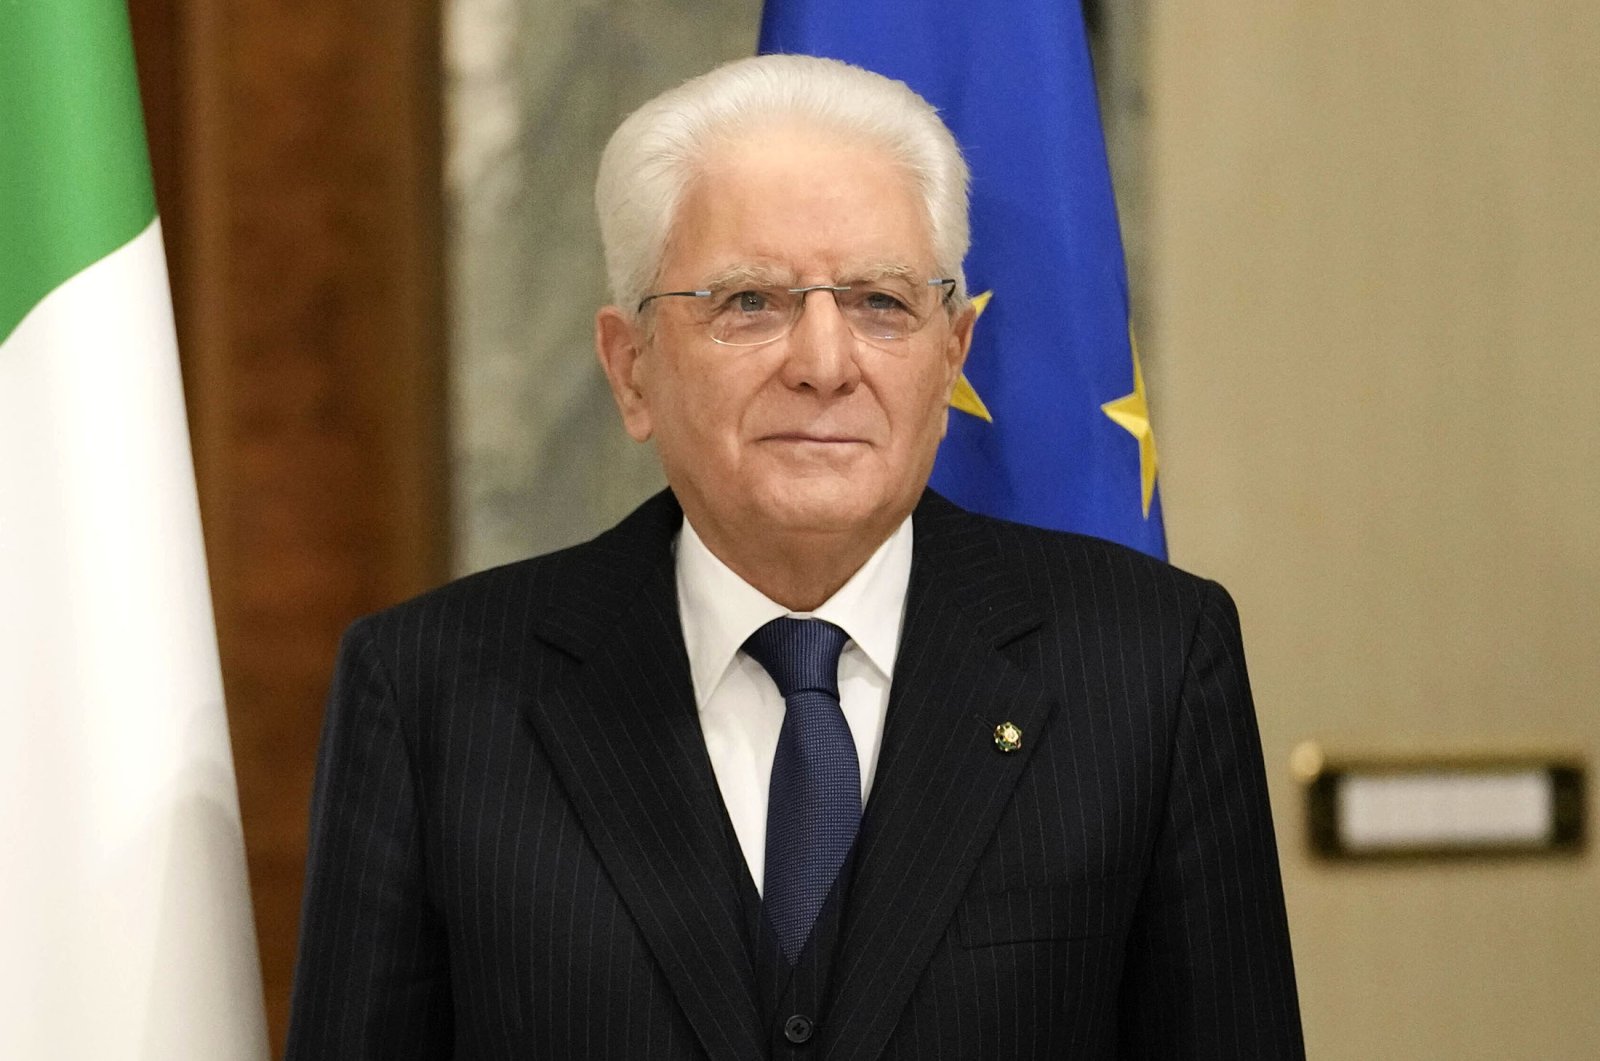 Italian President Sergio Mattarella stands with French President Emmanuel Macron at Quirinale Presidential Palace in Rome, Italy, Nov. 25, 2021. (AP Photo)